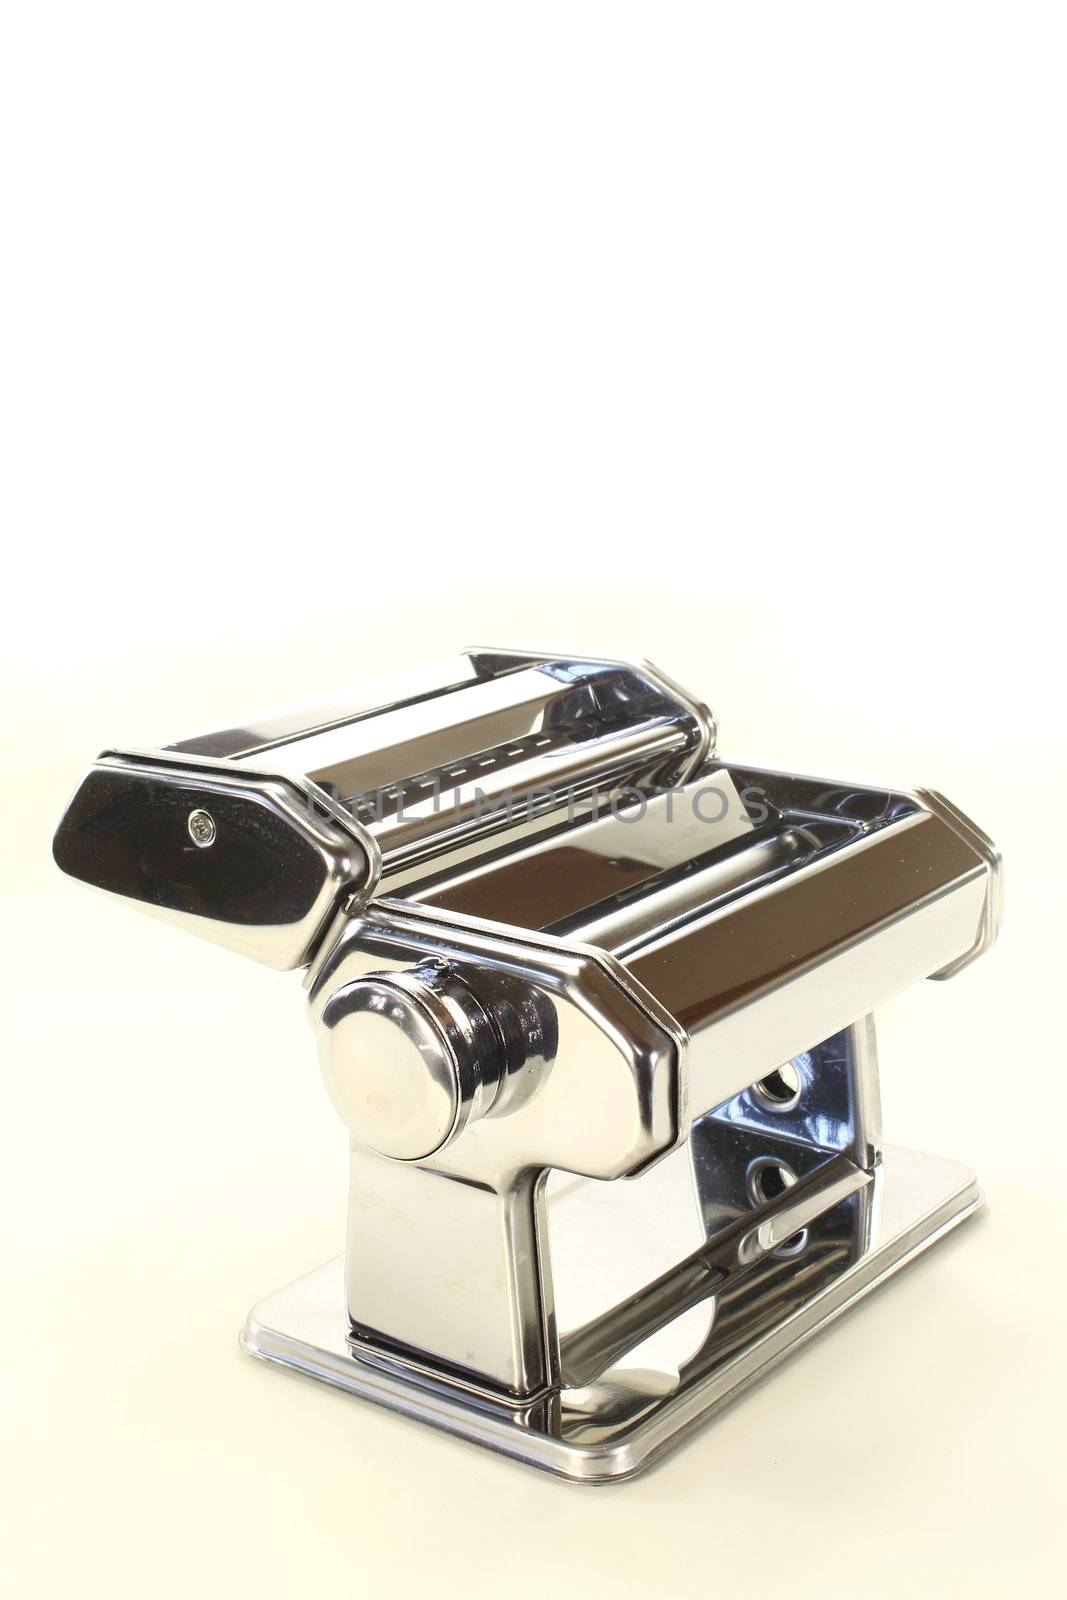 Stainless Steel Pasta Machine by discovery